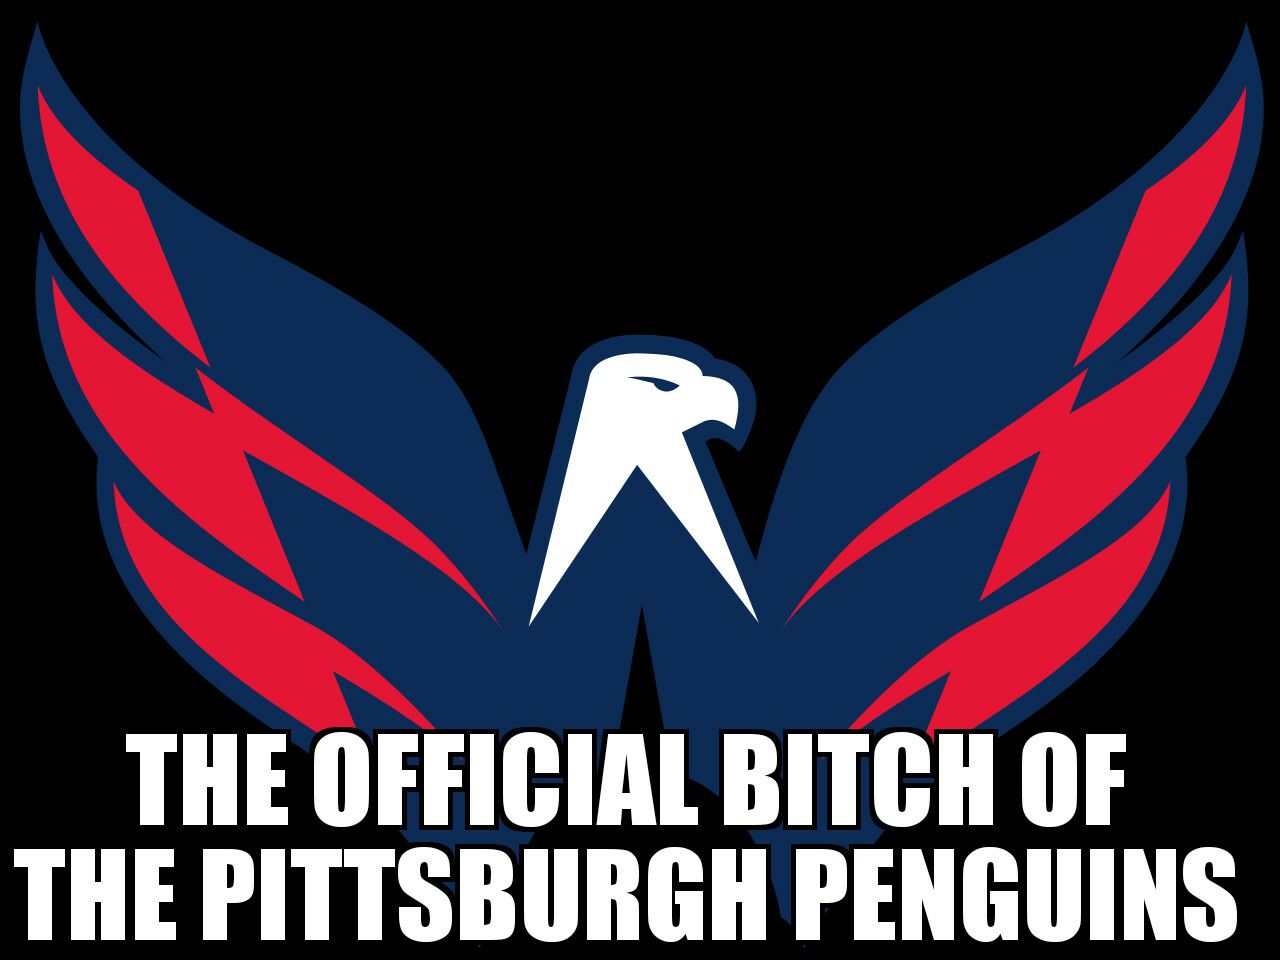 The official bitch of the Pittsburgh Penguins